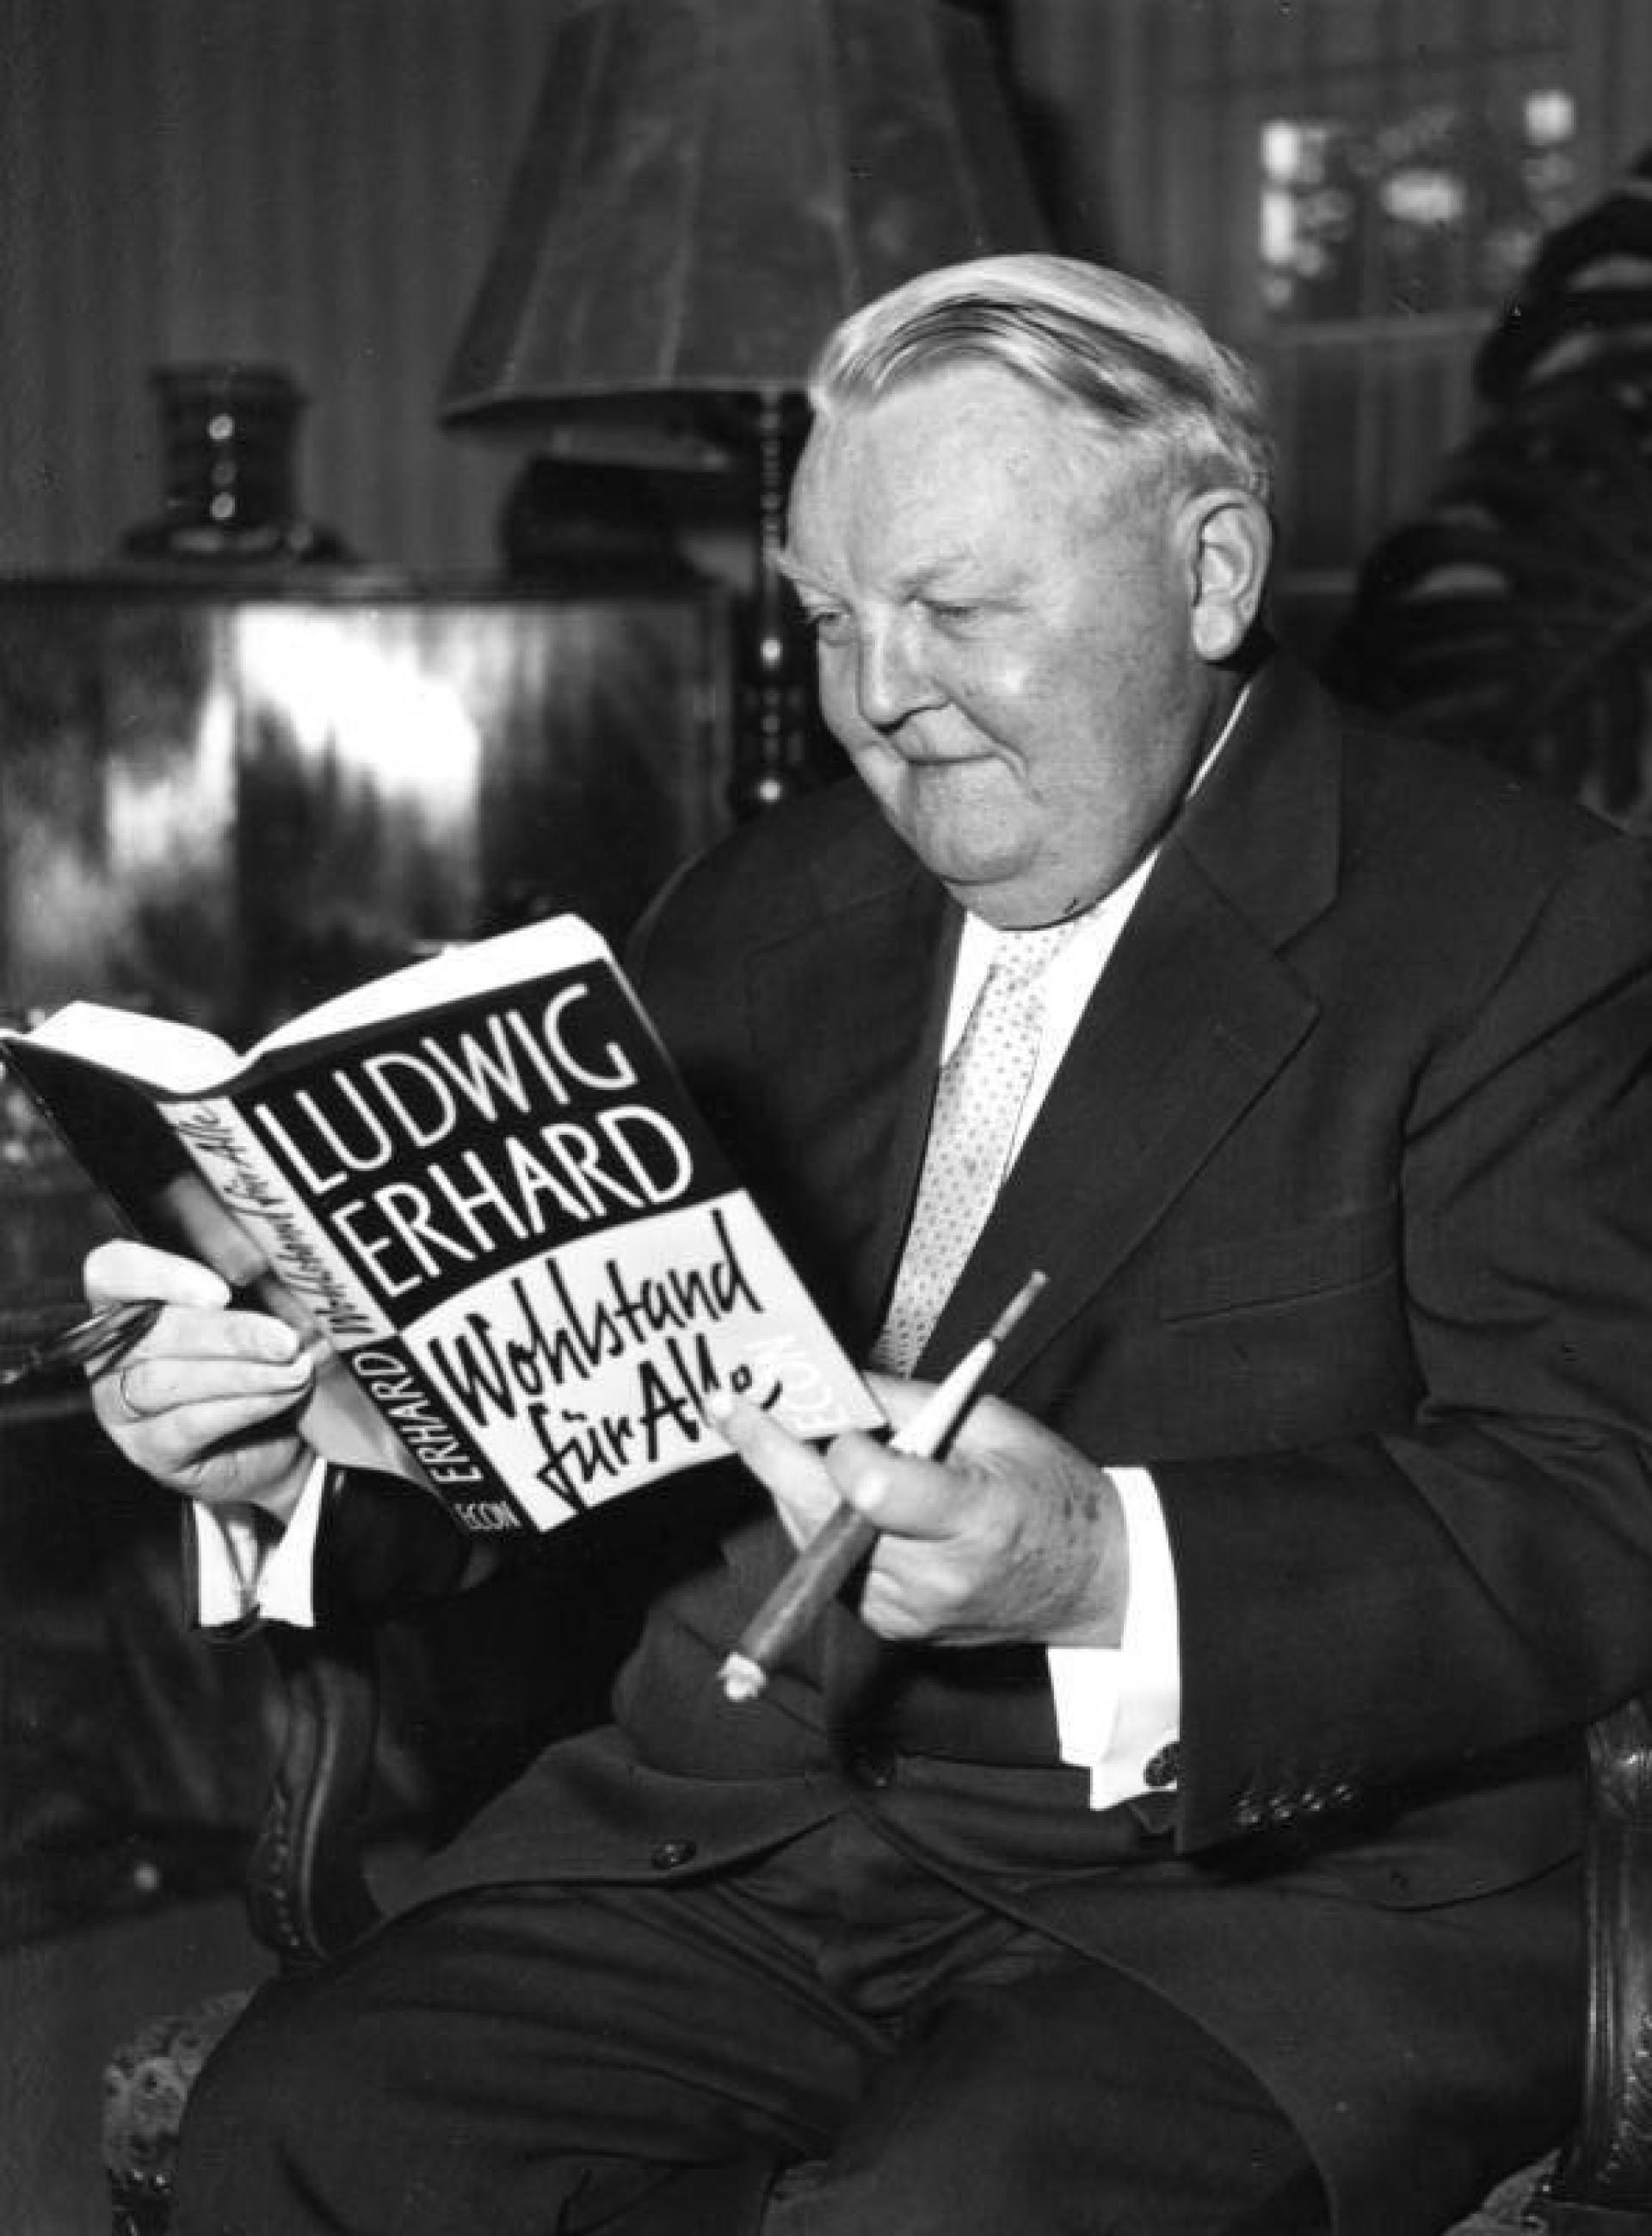 The second Chancellor of Germany, Ludwig Erhard.